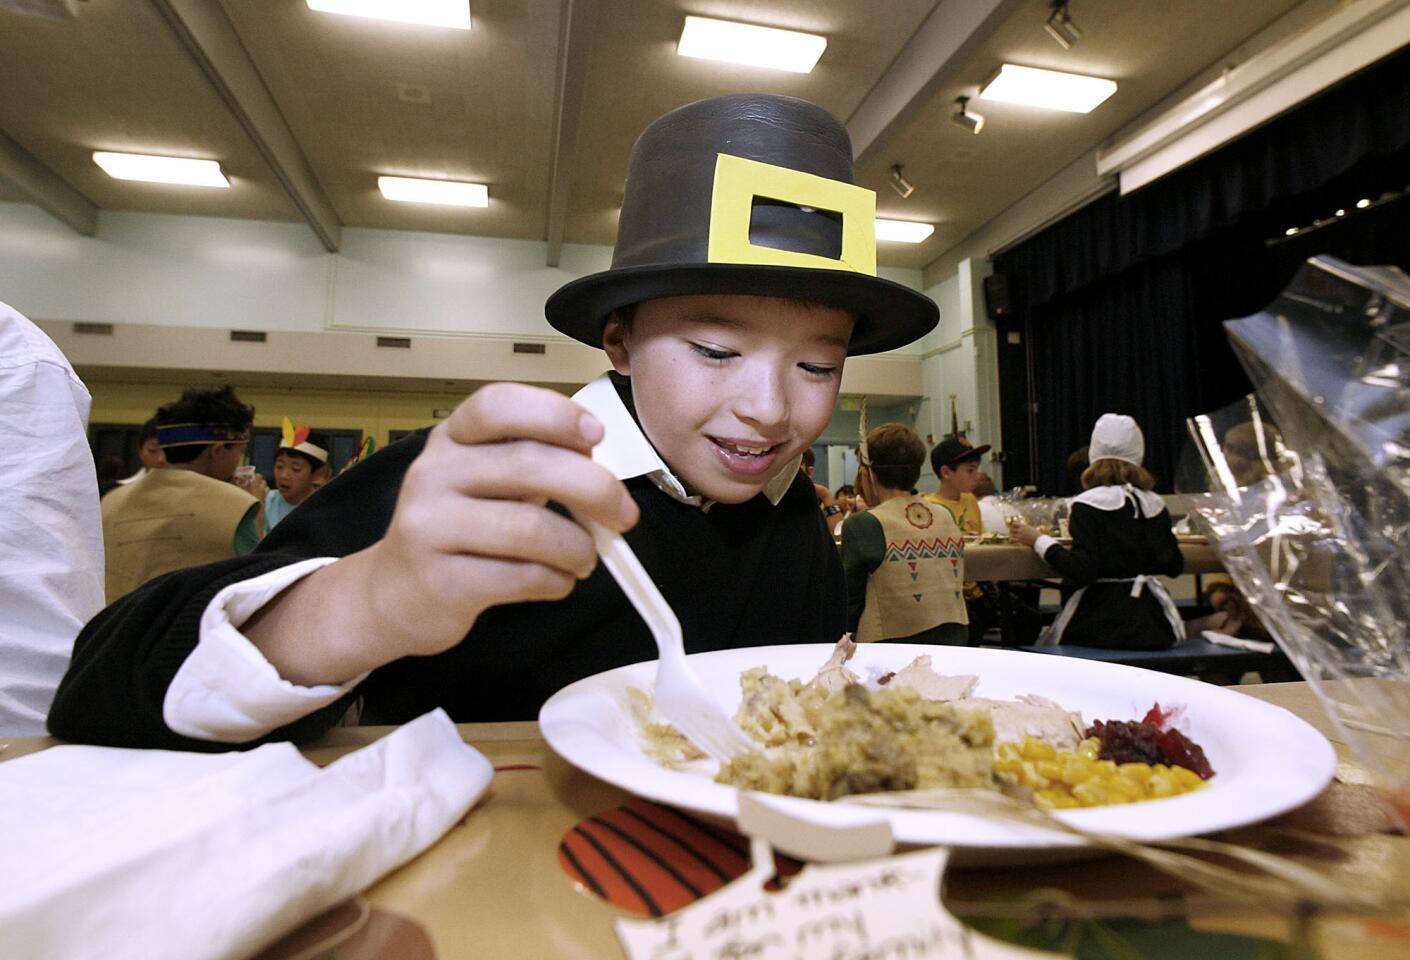 Fifth grader Jason Suh enjoys a Thanksgiving meal during lunch at La Canada Elementary School in La Canada on Friday, Nov. 16, 2012. The annual event has the 5th grade classes dress up in costumes and are served the meal by volunteer parents.